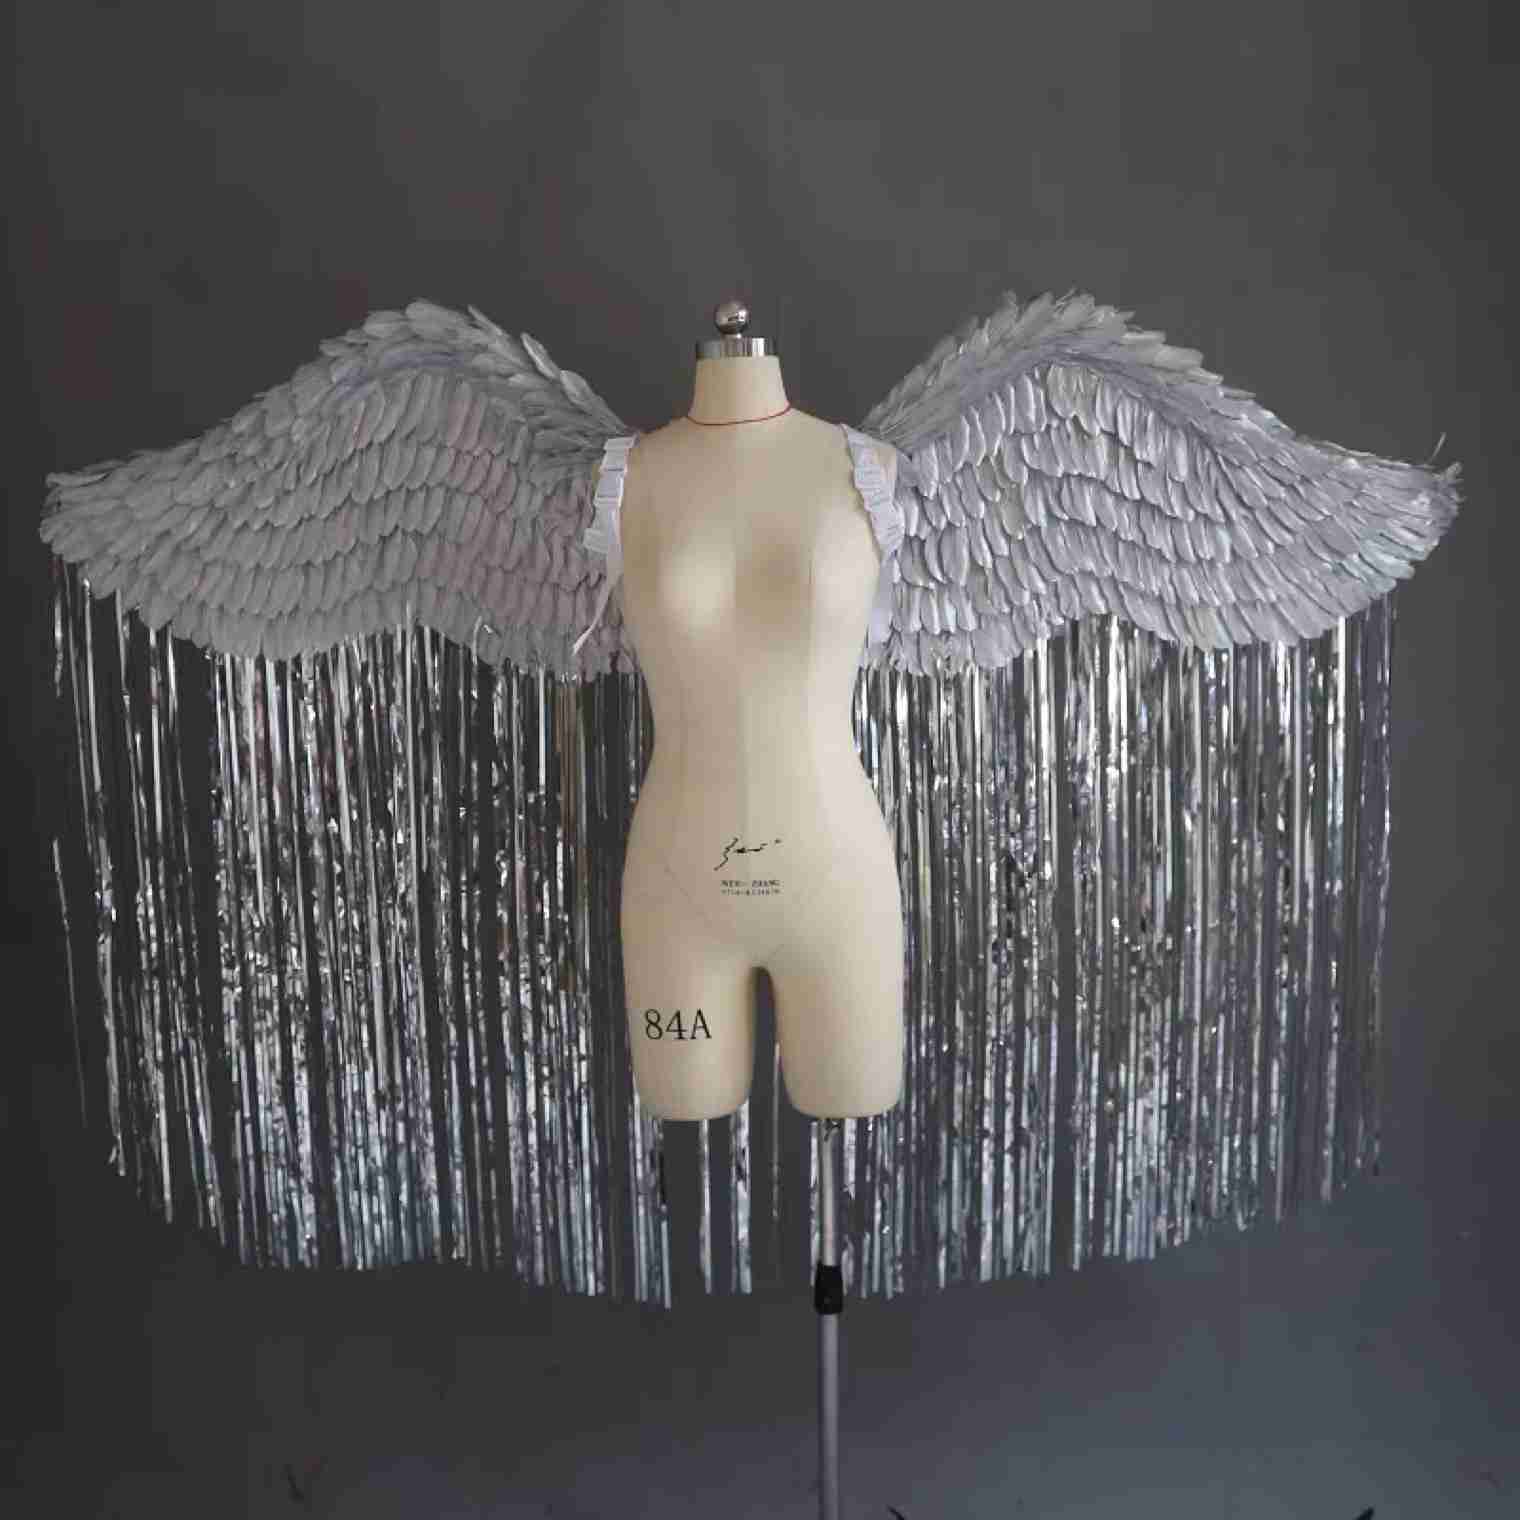 Our silver angel wings from the front. Made from goose feathers. Wings for angel wings costume. Suitable for photoshoots.